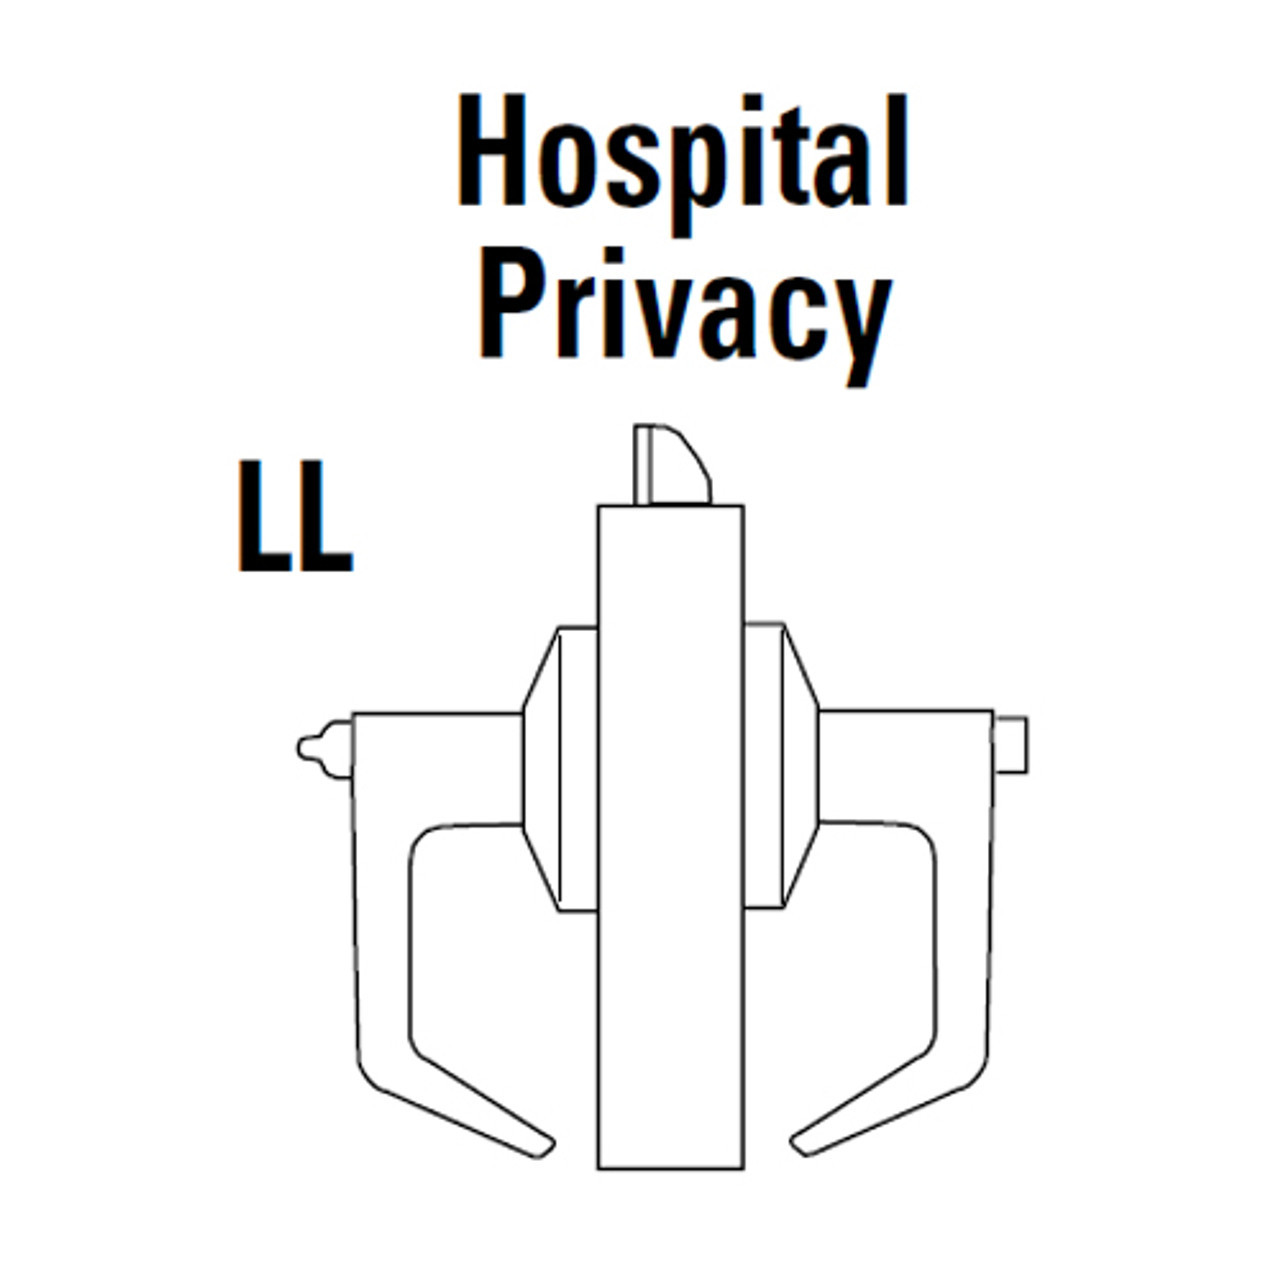 9K30LL16LSTK618LM Best 9K Series Hospital Privacy Heavy Duty Cylindrical Lever Locks with Curved Without Return Lever Design in Bright Nickel